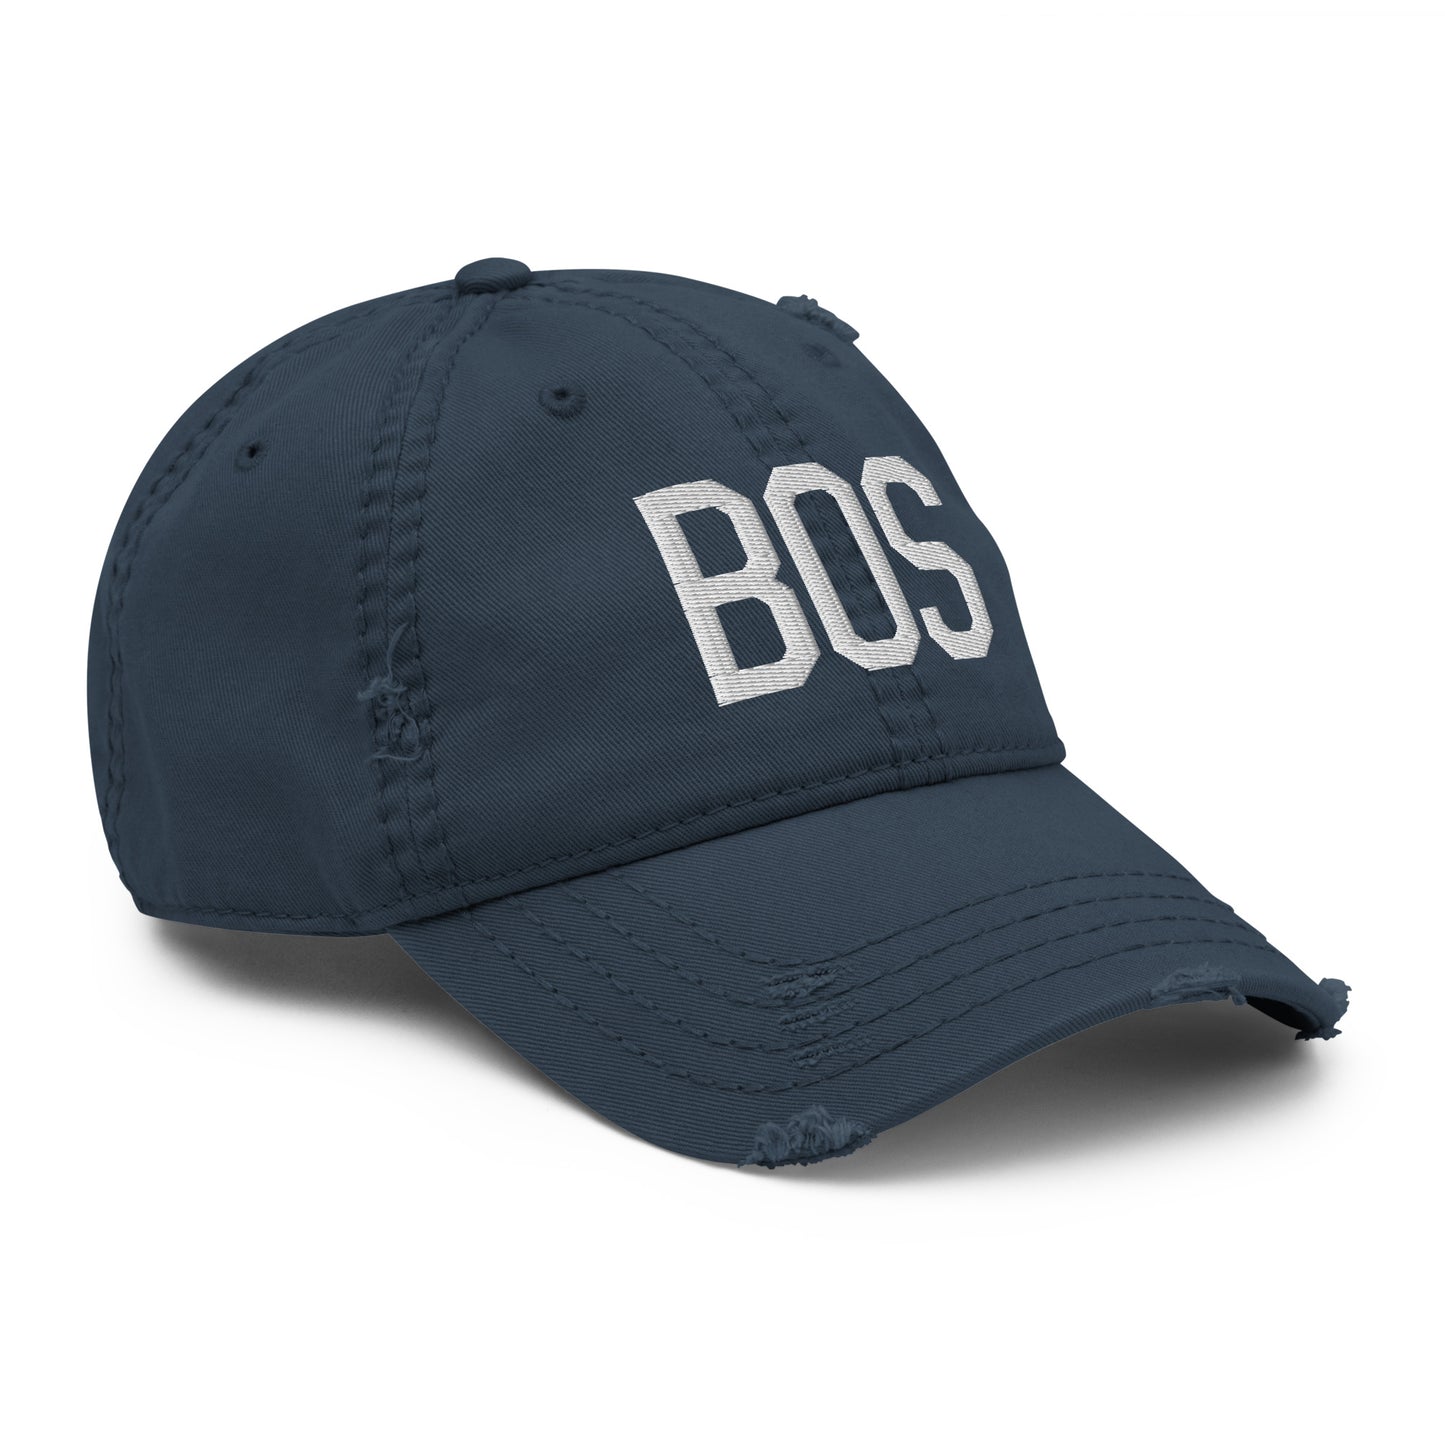 Airport Code Distressed Hat - White • BOS Boston • YHM Designs - Image 14